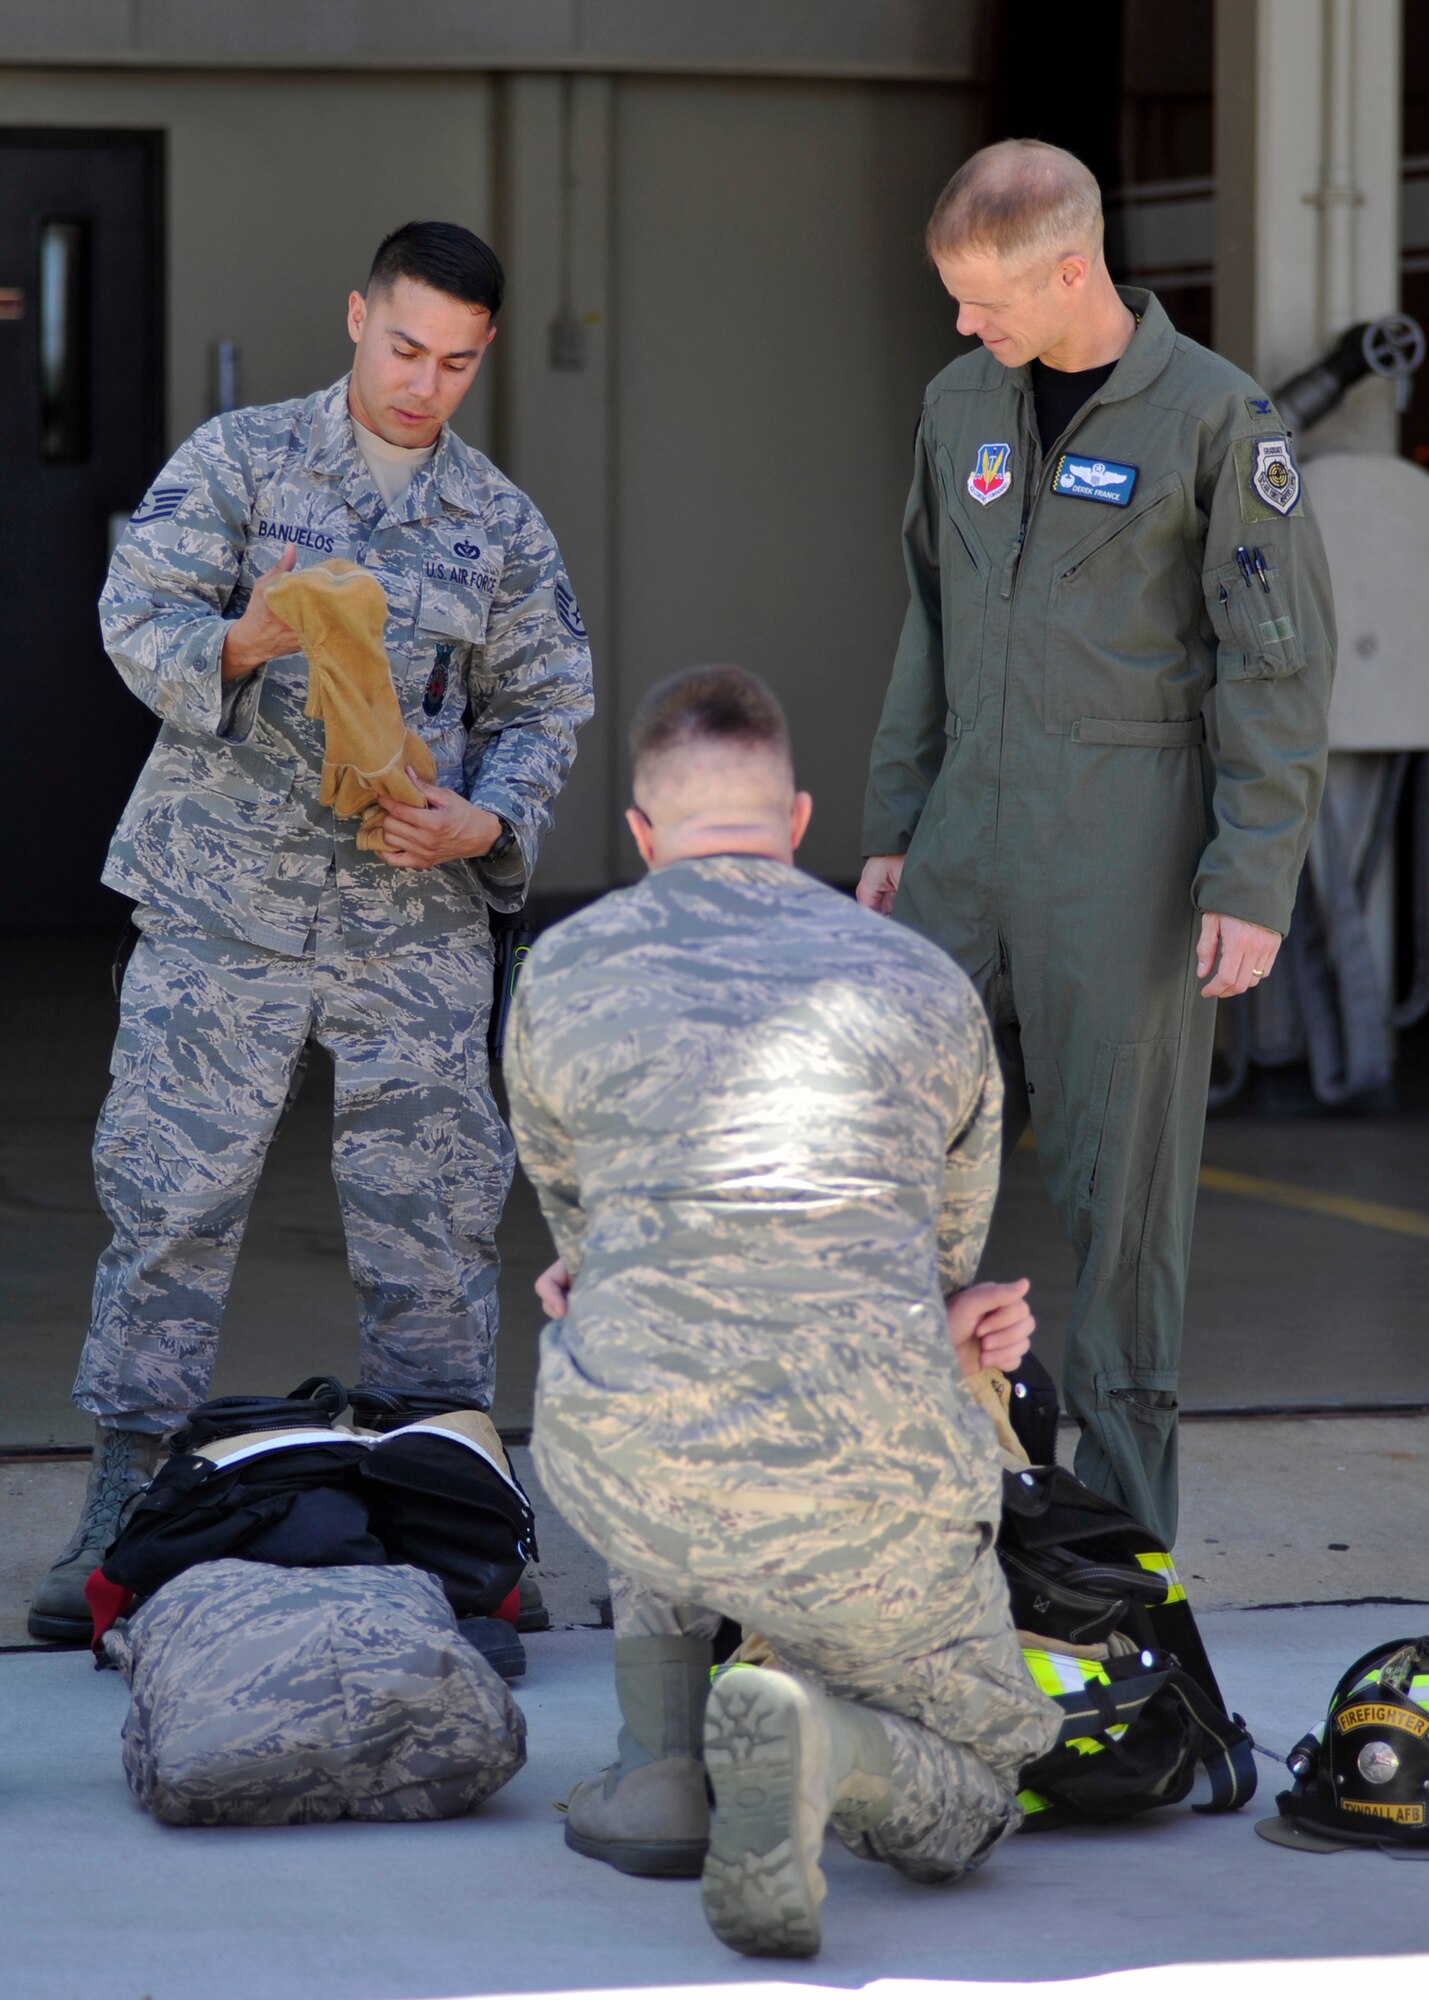 Staff Sgt. Jacob Banuelos, 325th Civil Engineer Squadron lead firefighter (left), shows Col. Derek C. France, 325th Fighter Wing commander (right), fire protection gear April 8, 2016. Banuelos was chosen to be the Airman shadowed by the base commander for April as part of the Airman Shadow Program. (U.S. Air Force photo by Senior Airman Sergio A. Gamboa/Released)